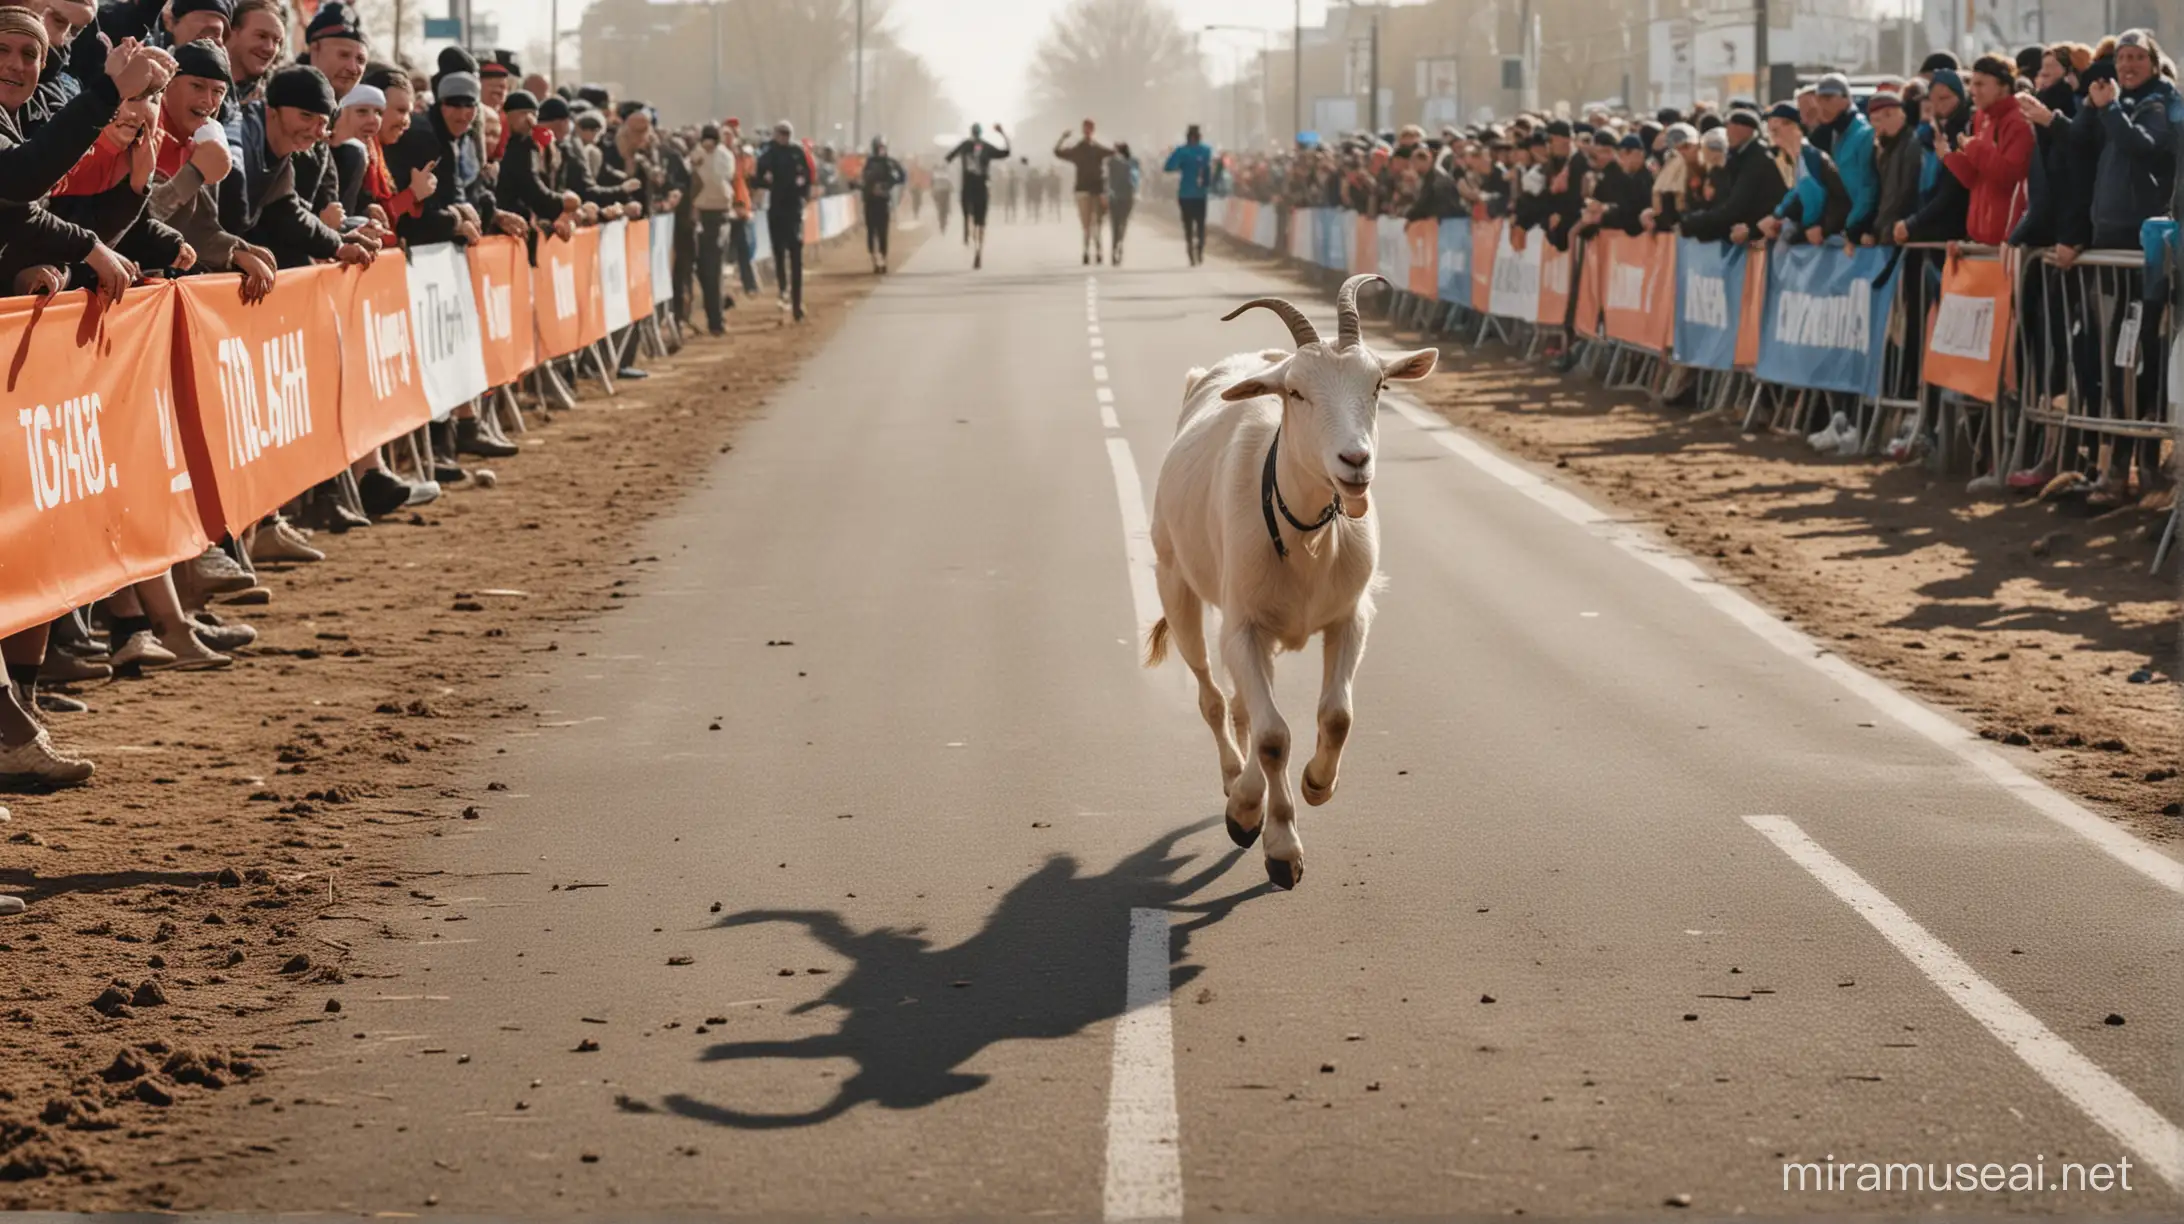 show me a realistic photo framed of an epic moment a GOAT is crossing the finishing line at a marathon as a winner